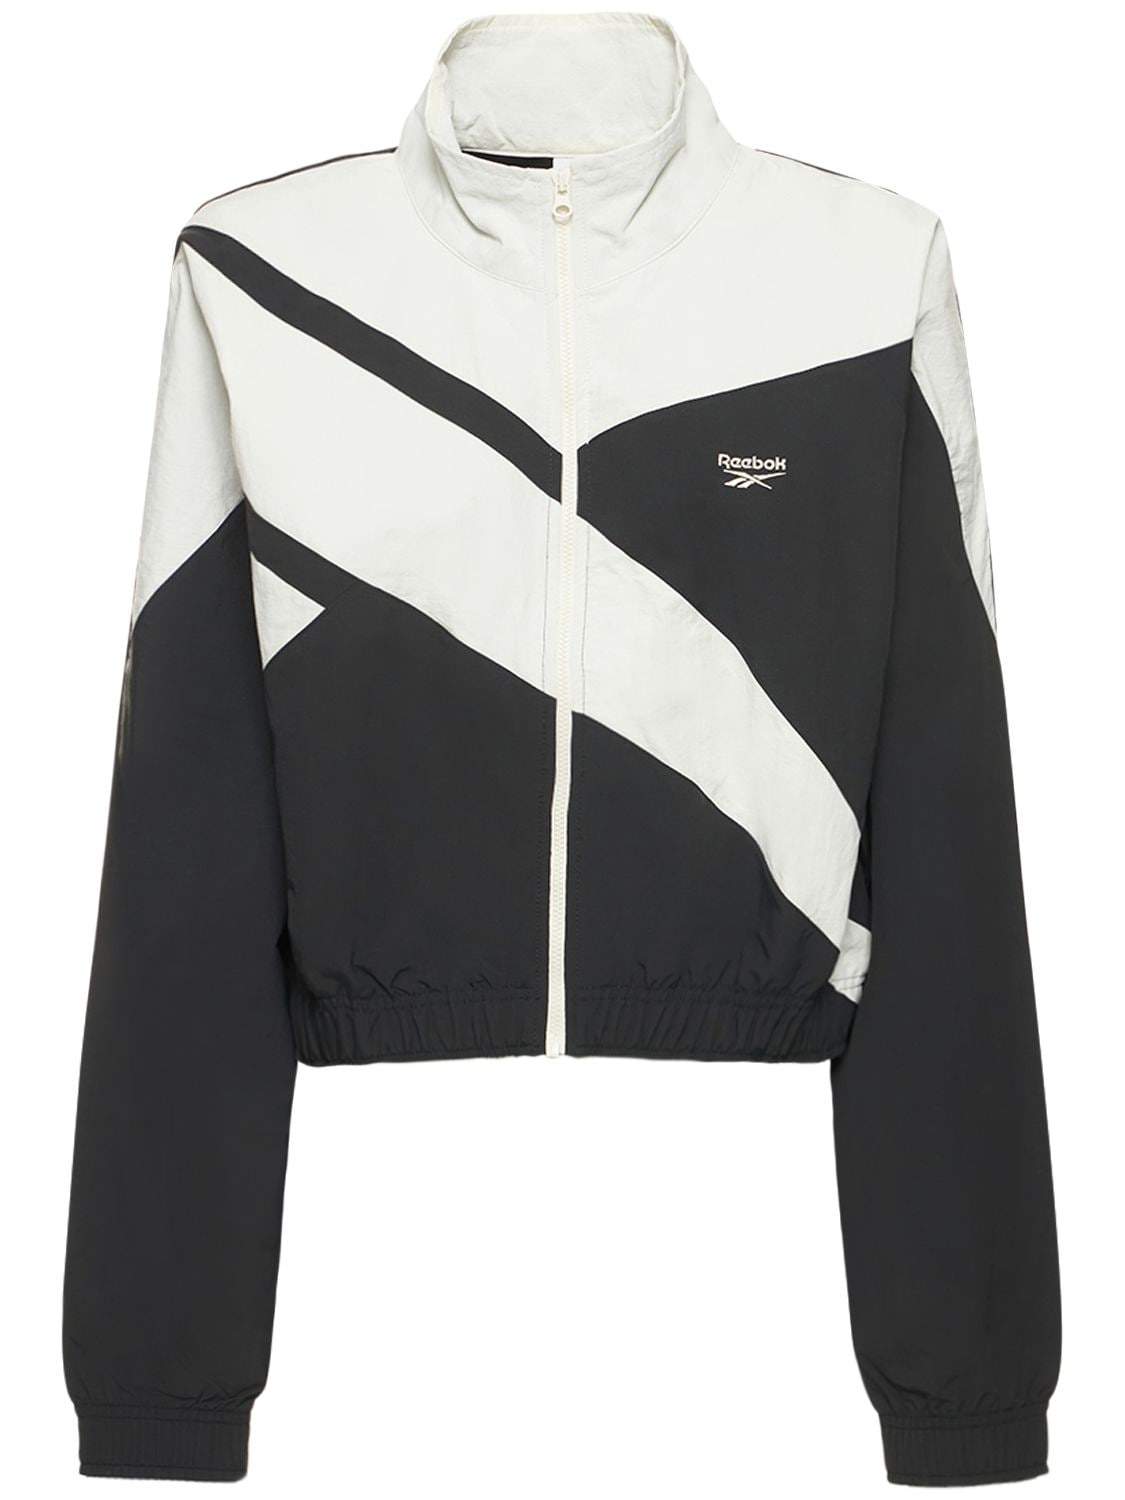 REEBOK RELAXED FIT TRACK SUIT JACKET